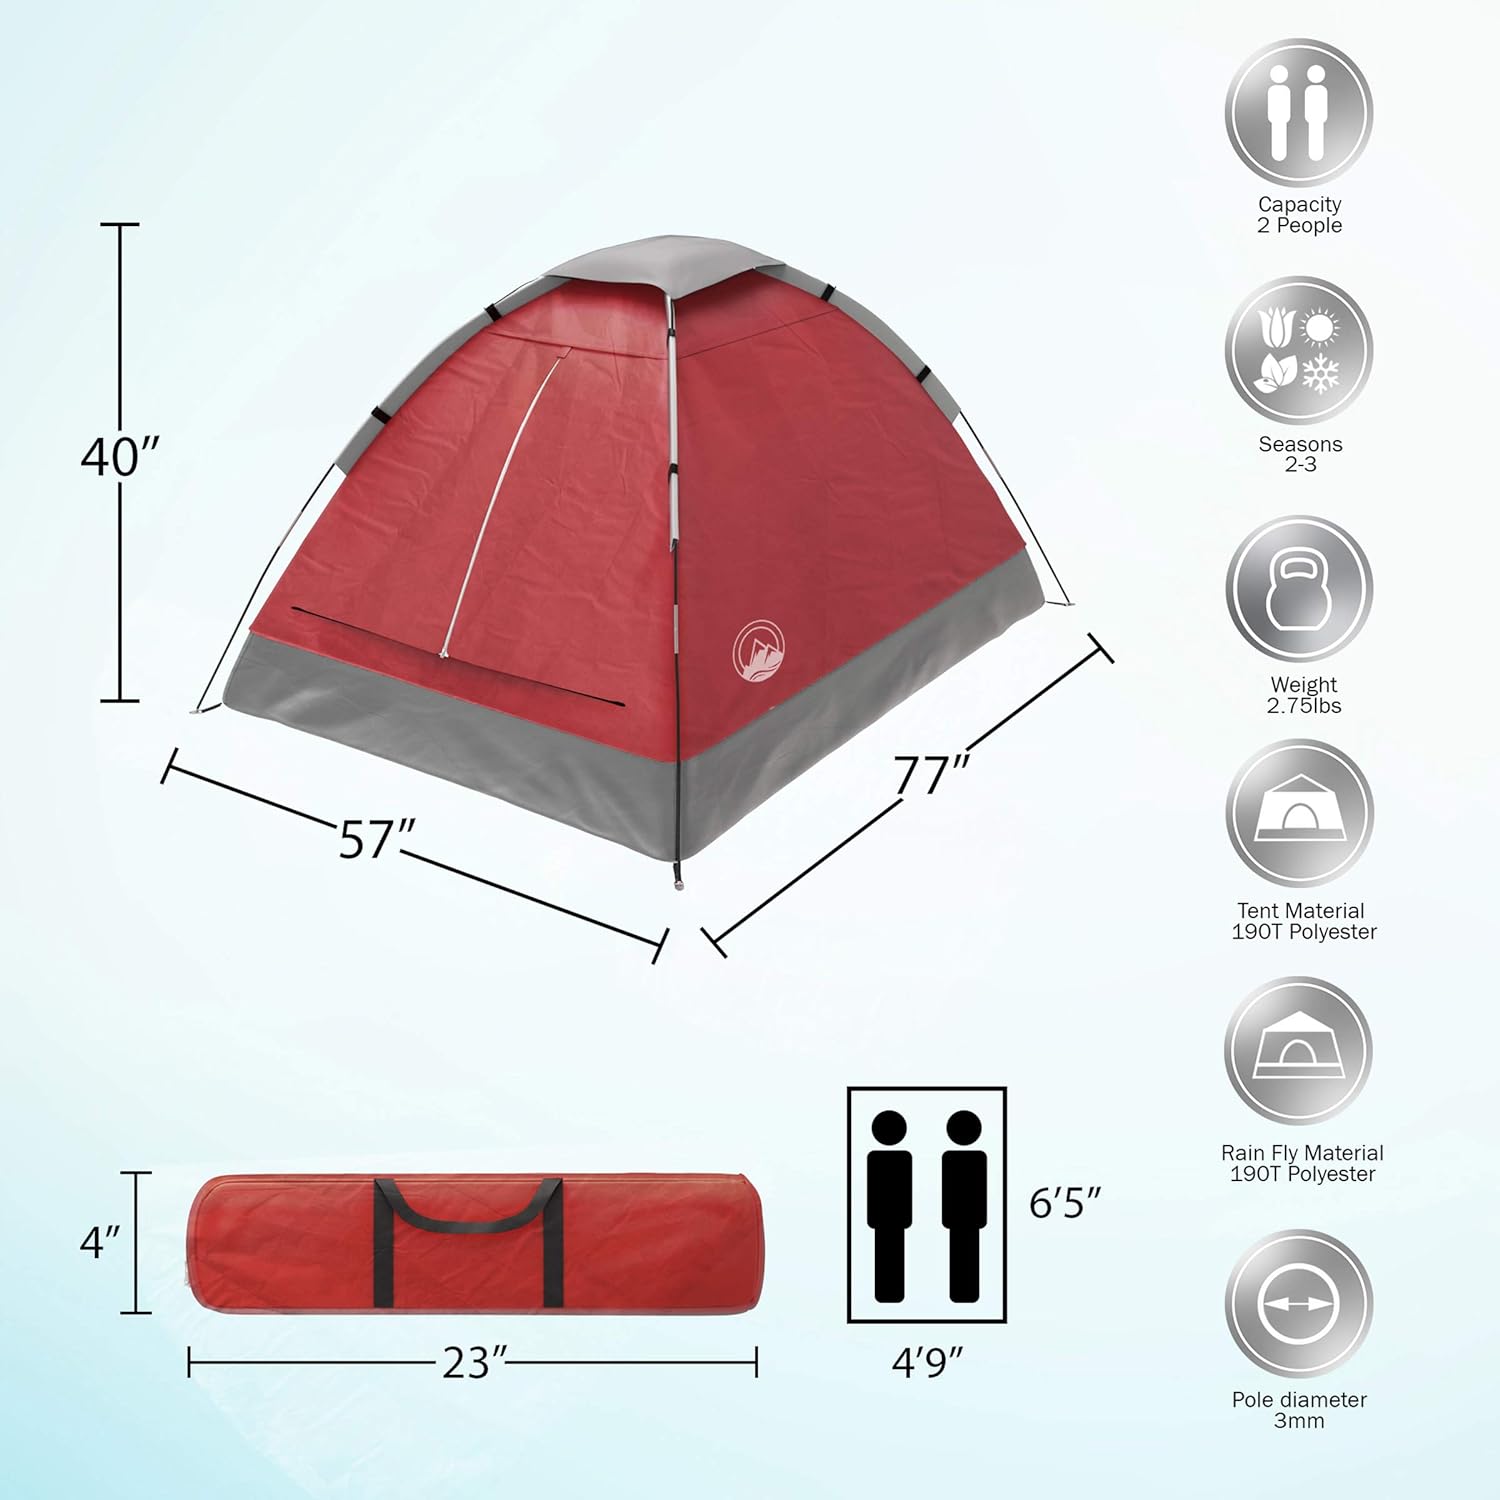 2-Person Dome Tent Review